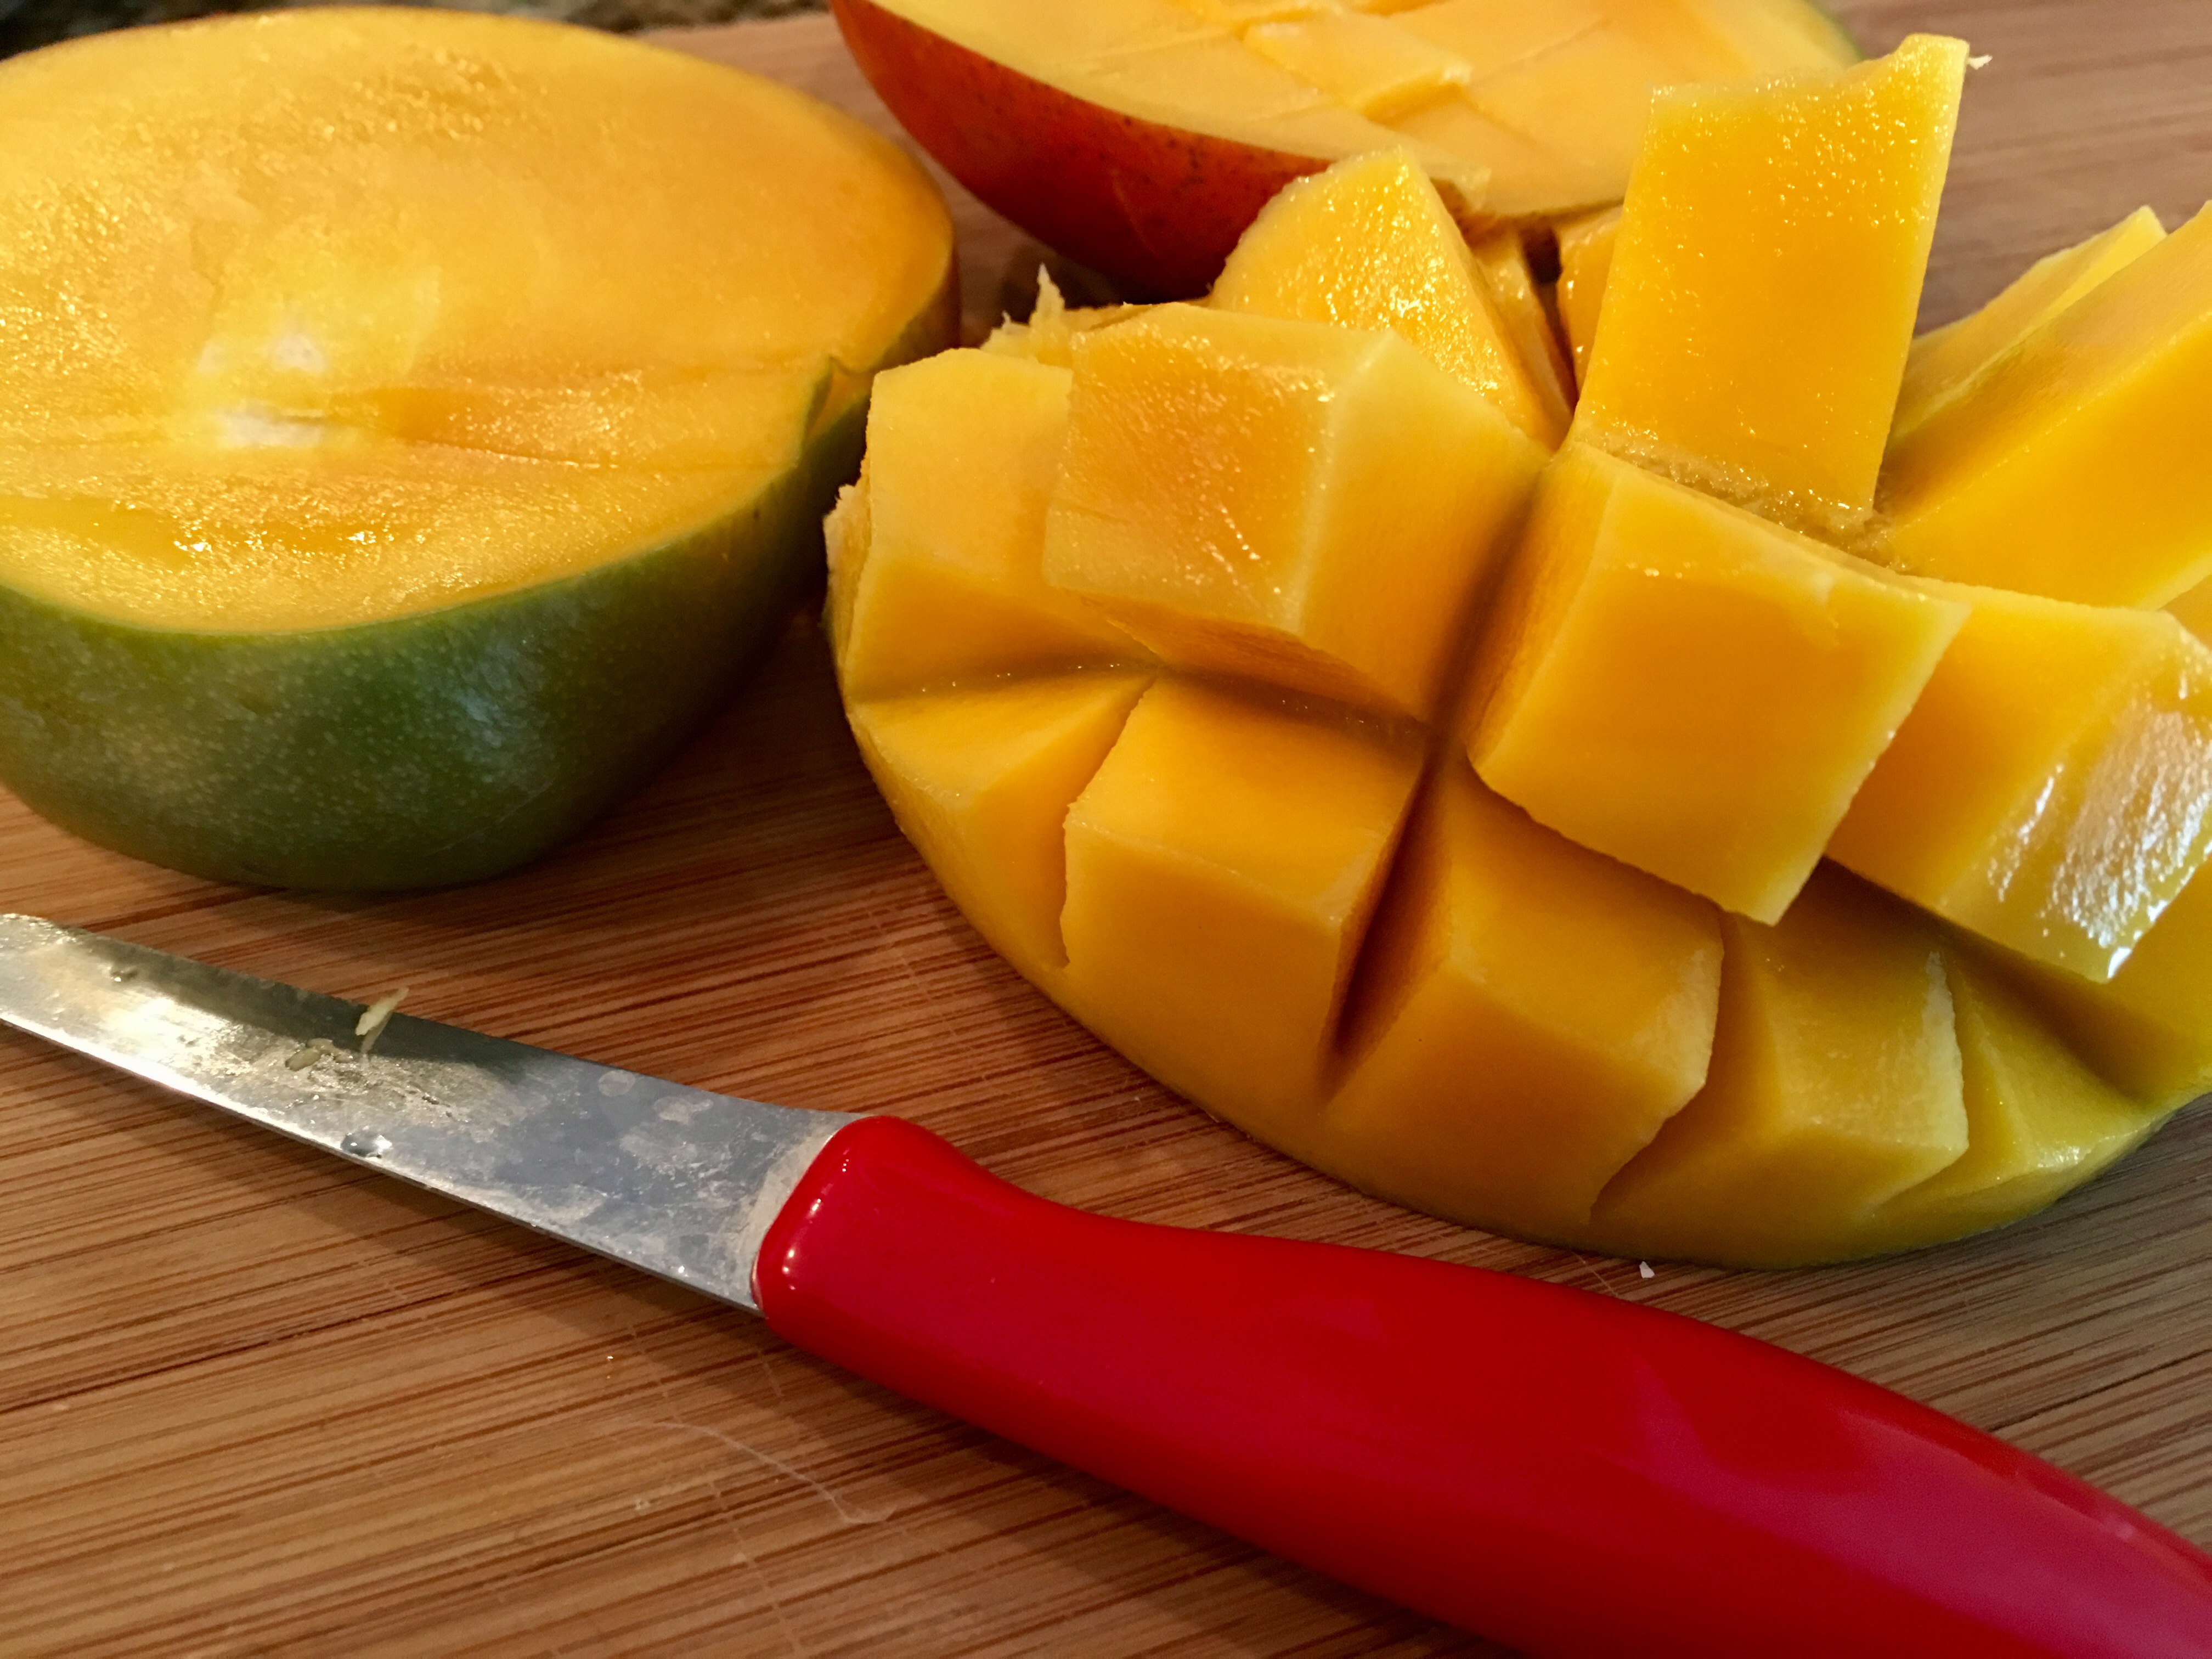 How to cut a mango without peeling